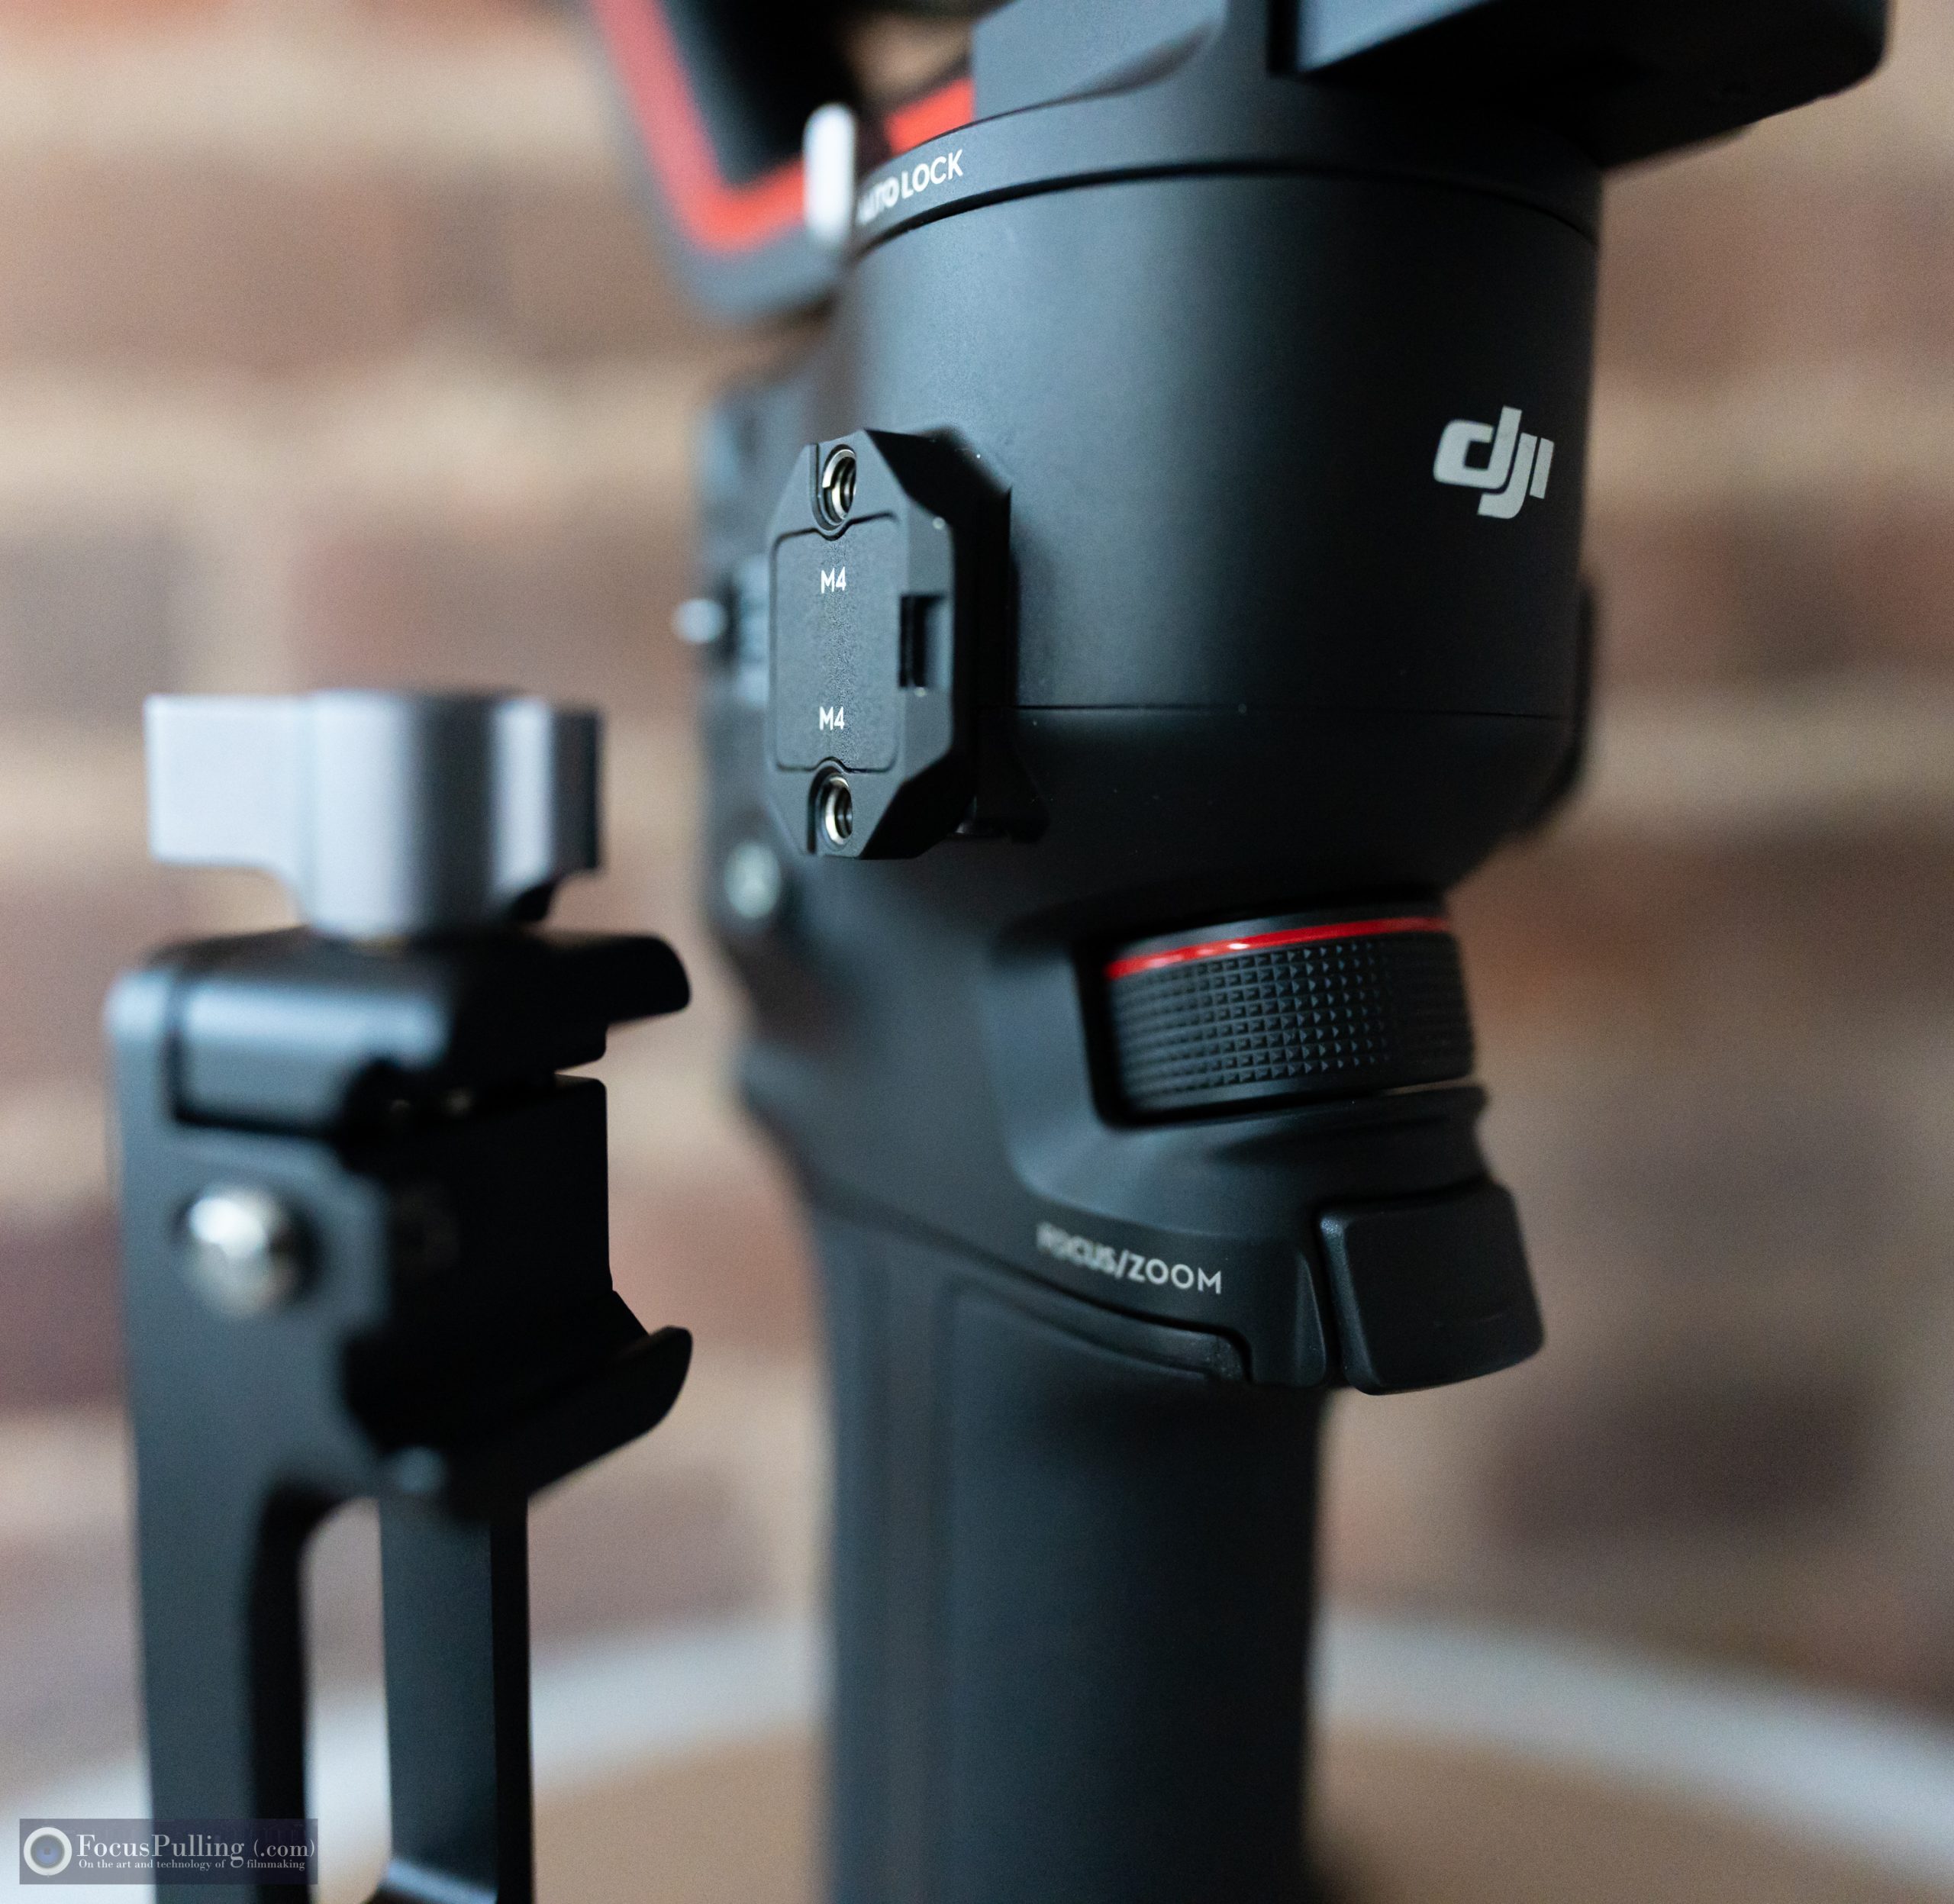 DJI RS 3: Essential accessories for the best all-around gimbal